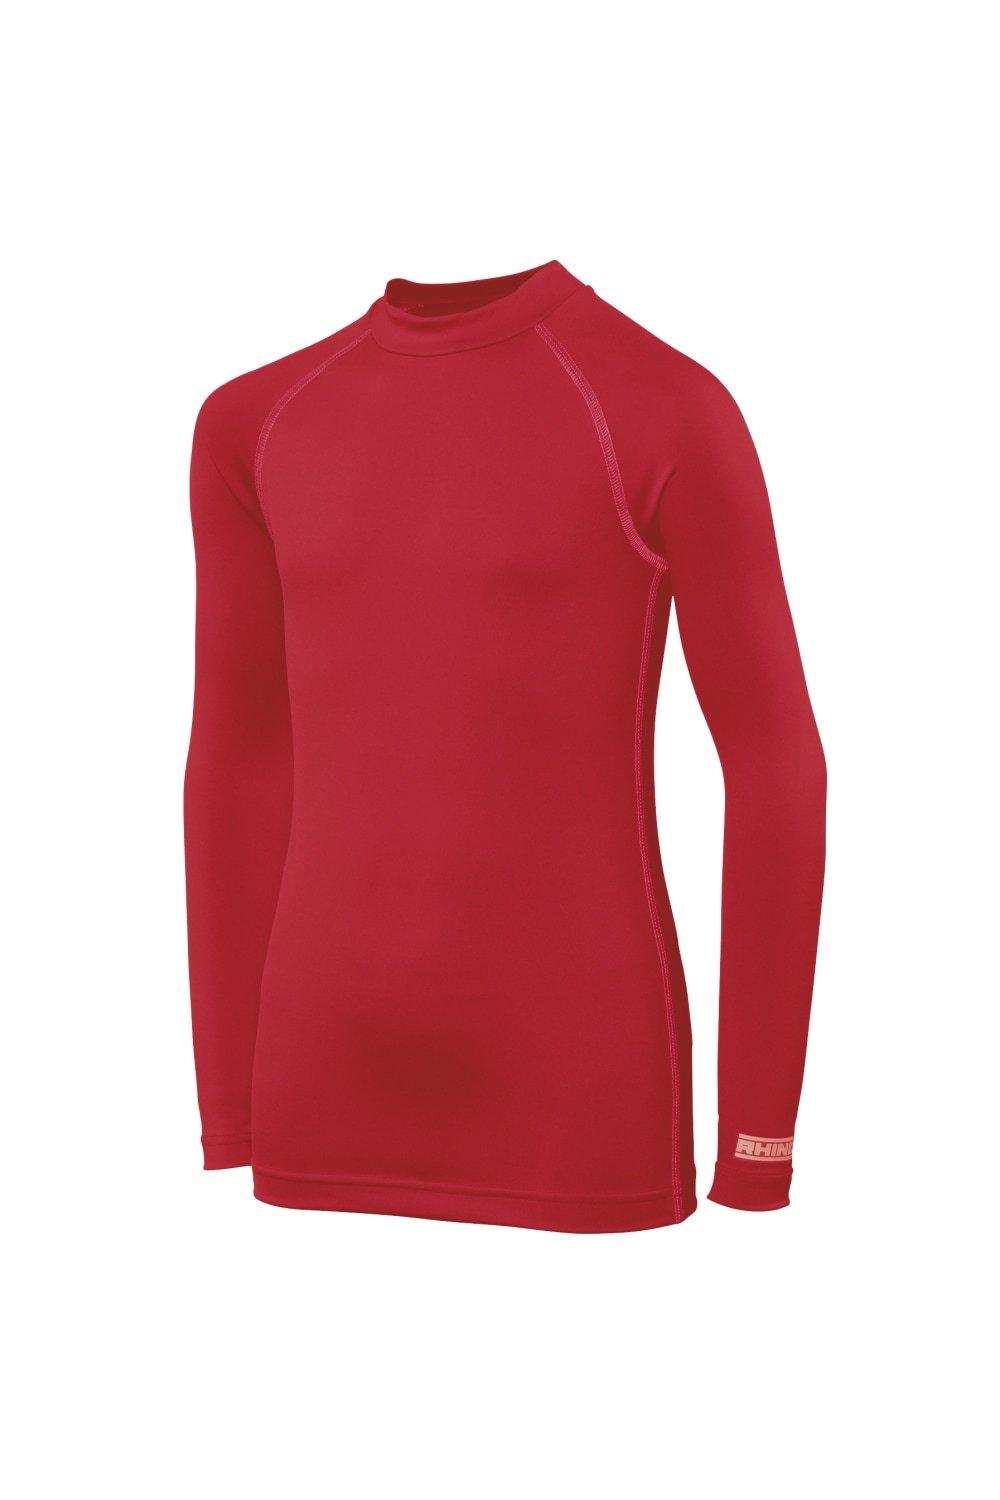 Long Sleeve Thermal Underwear Base Layer Vest Top